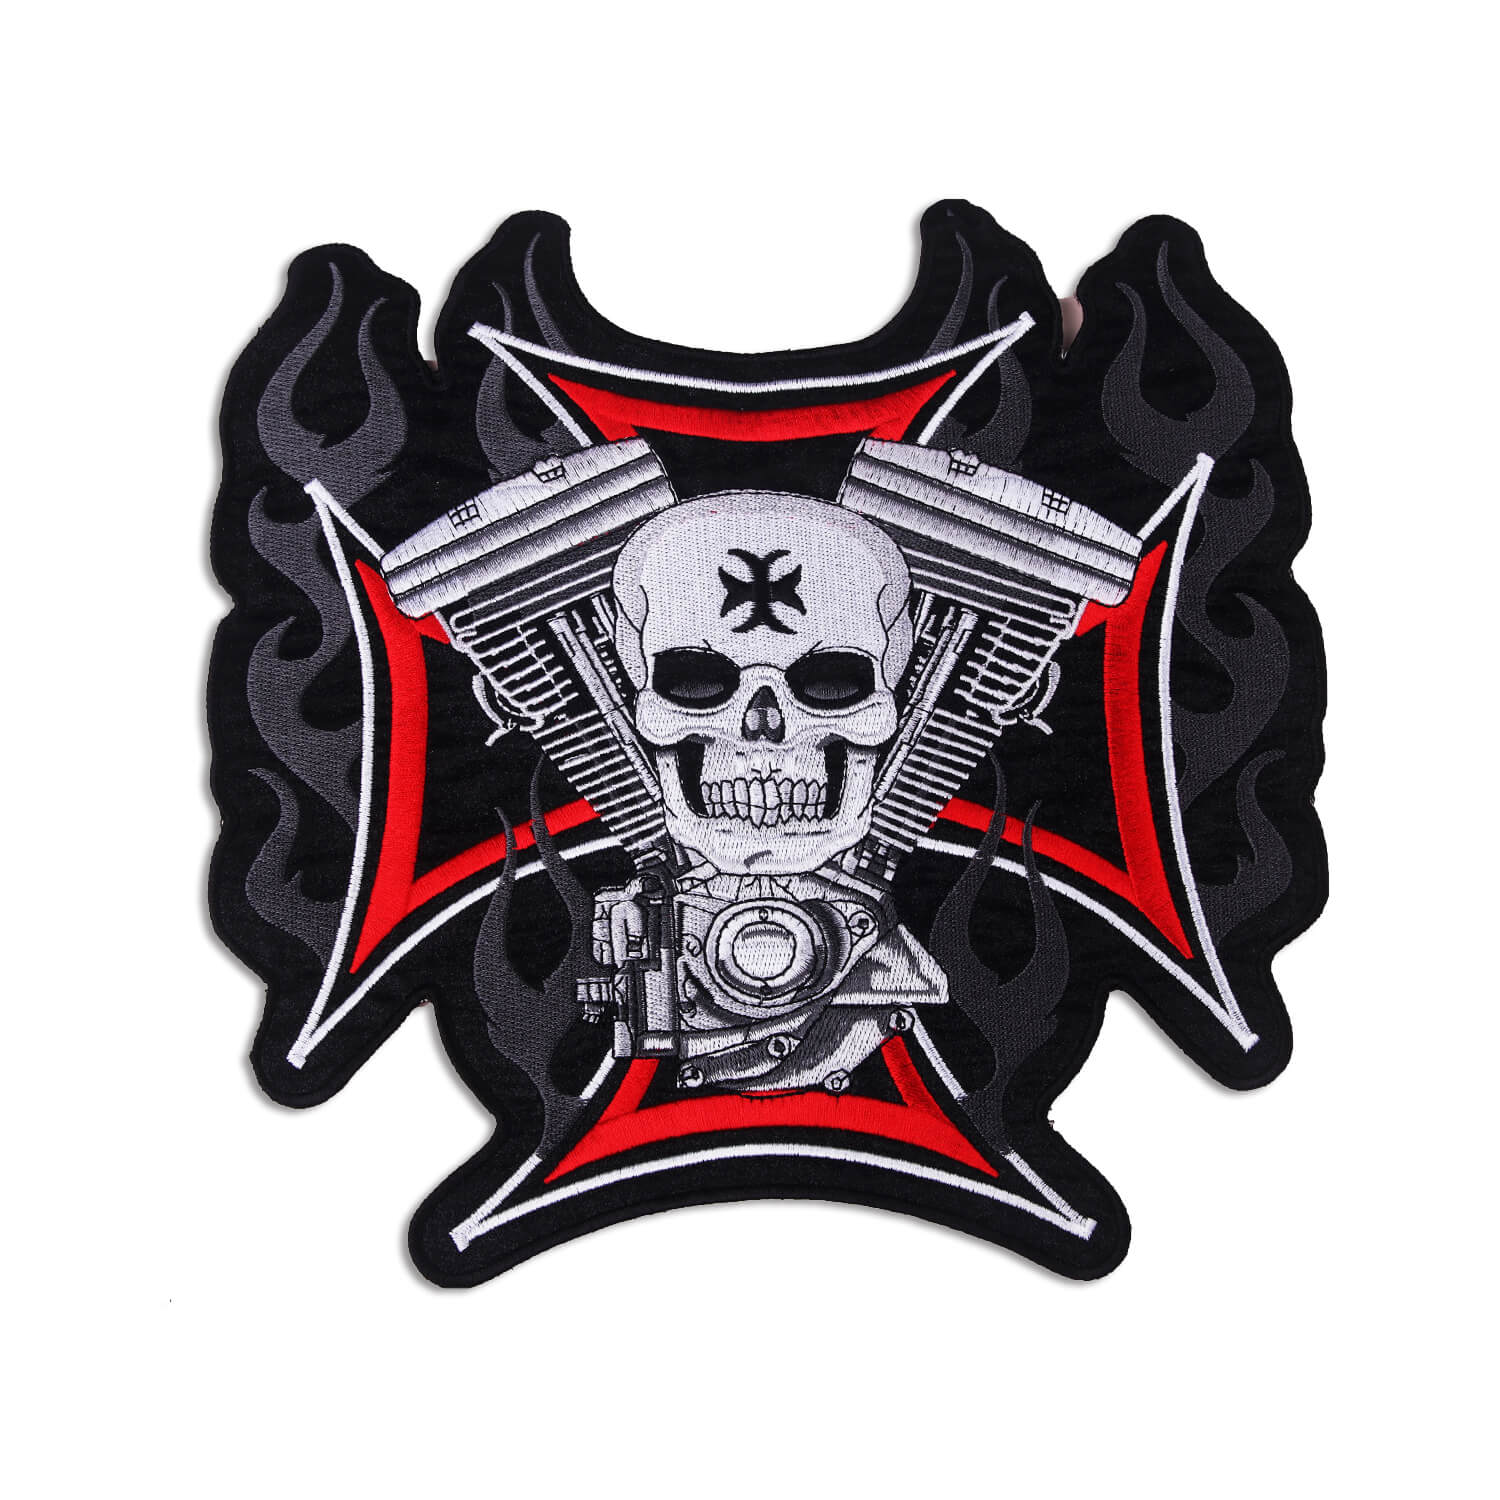 Motorcycle club patch